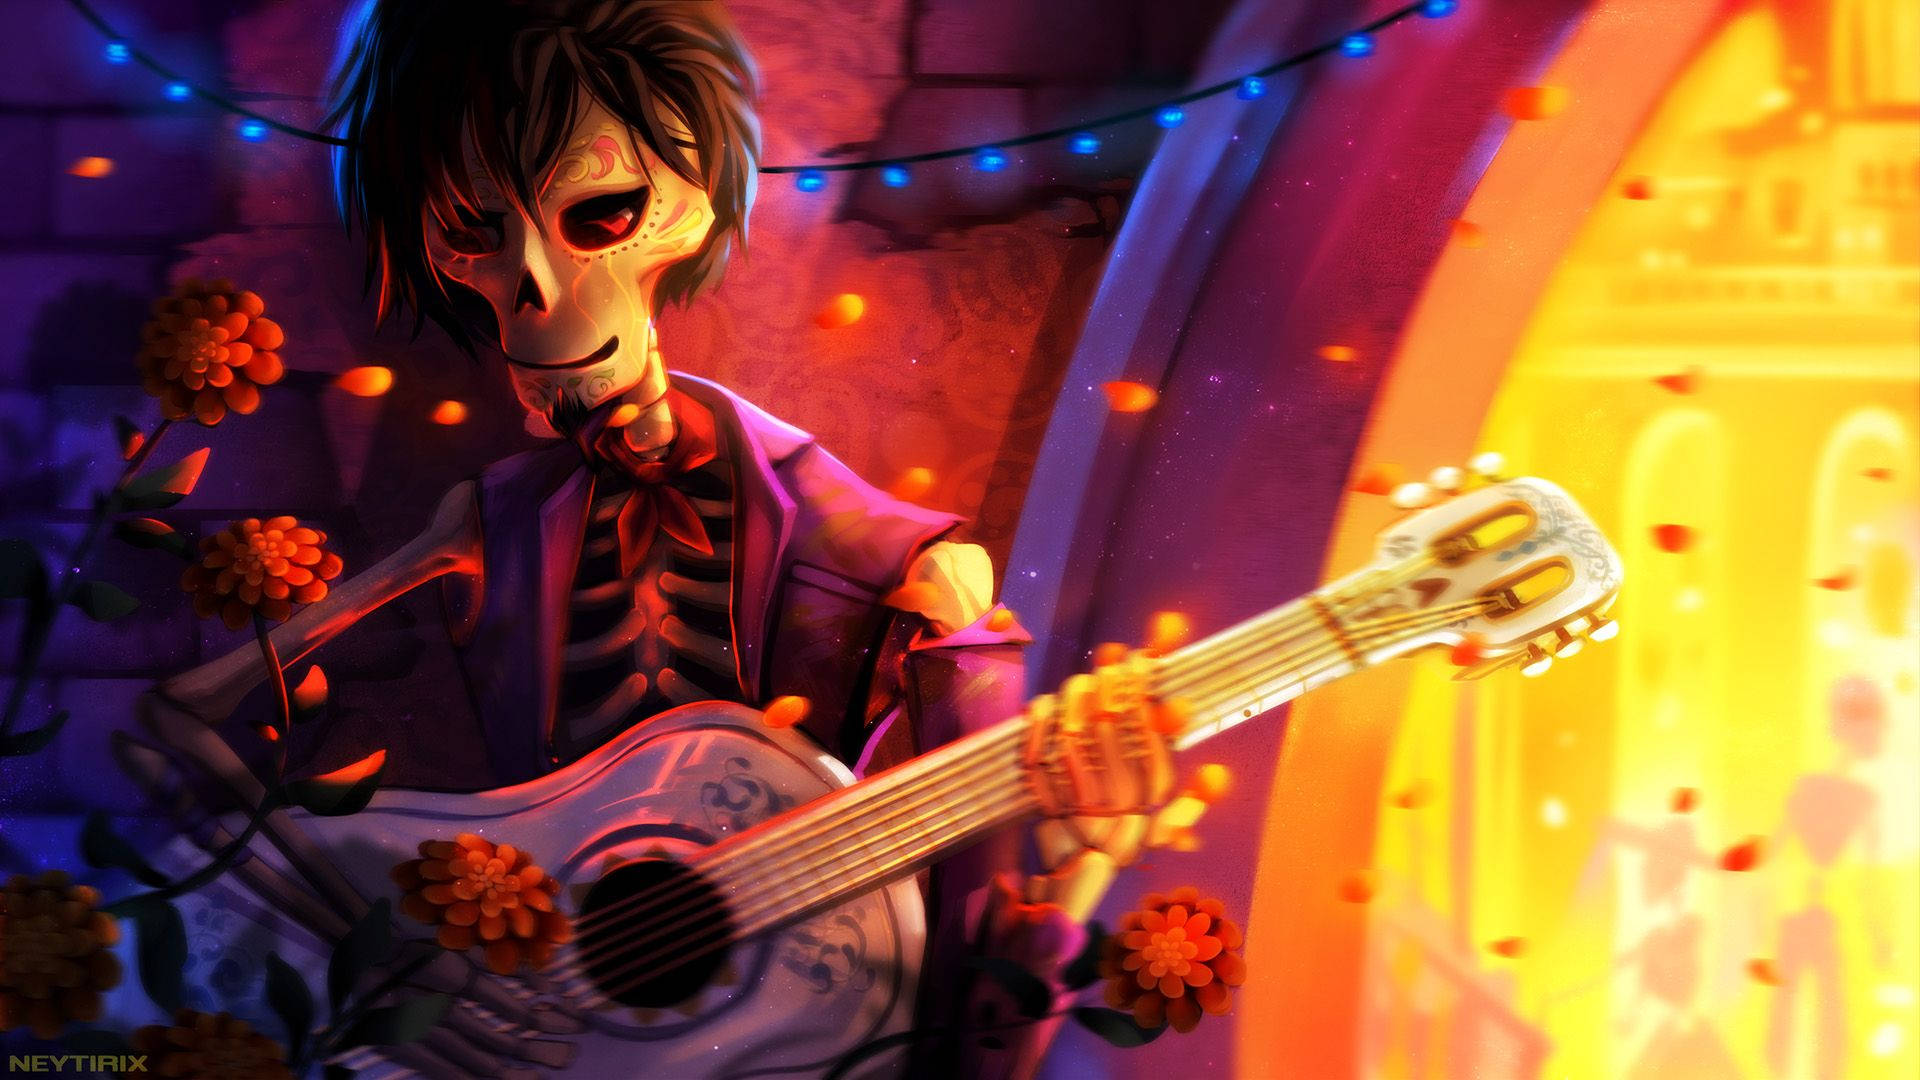 Coco Hector Guitar Illustration Background